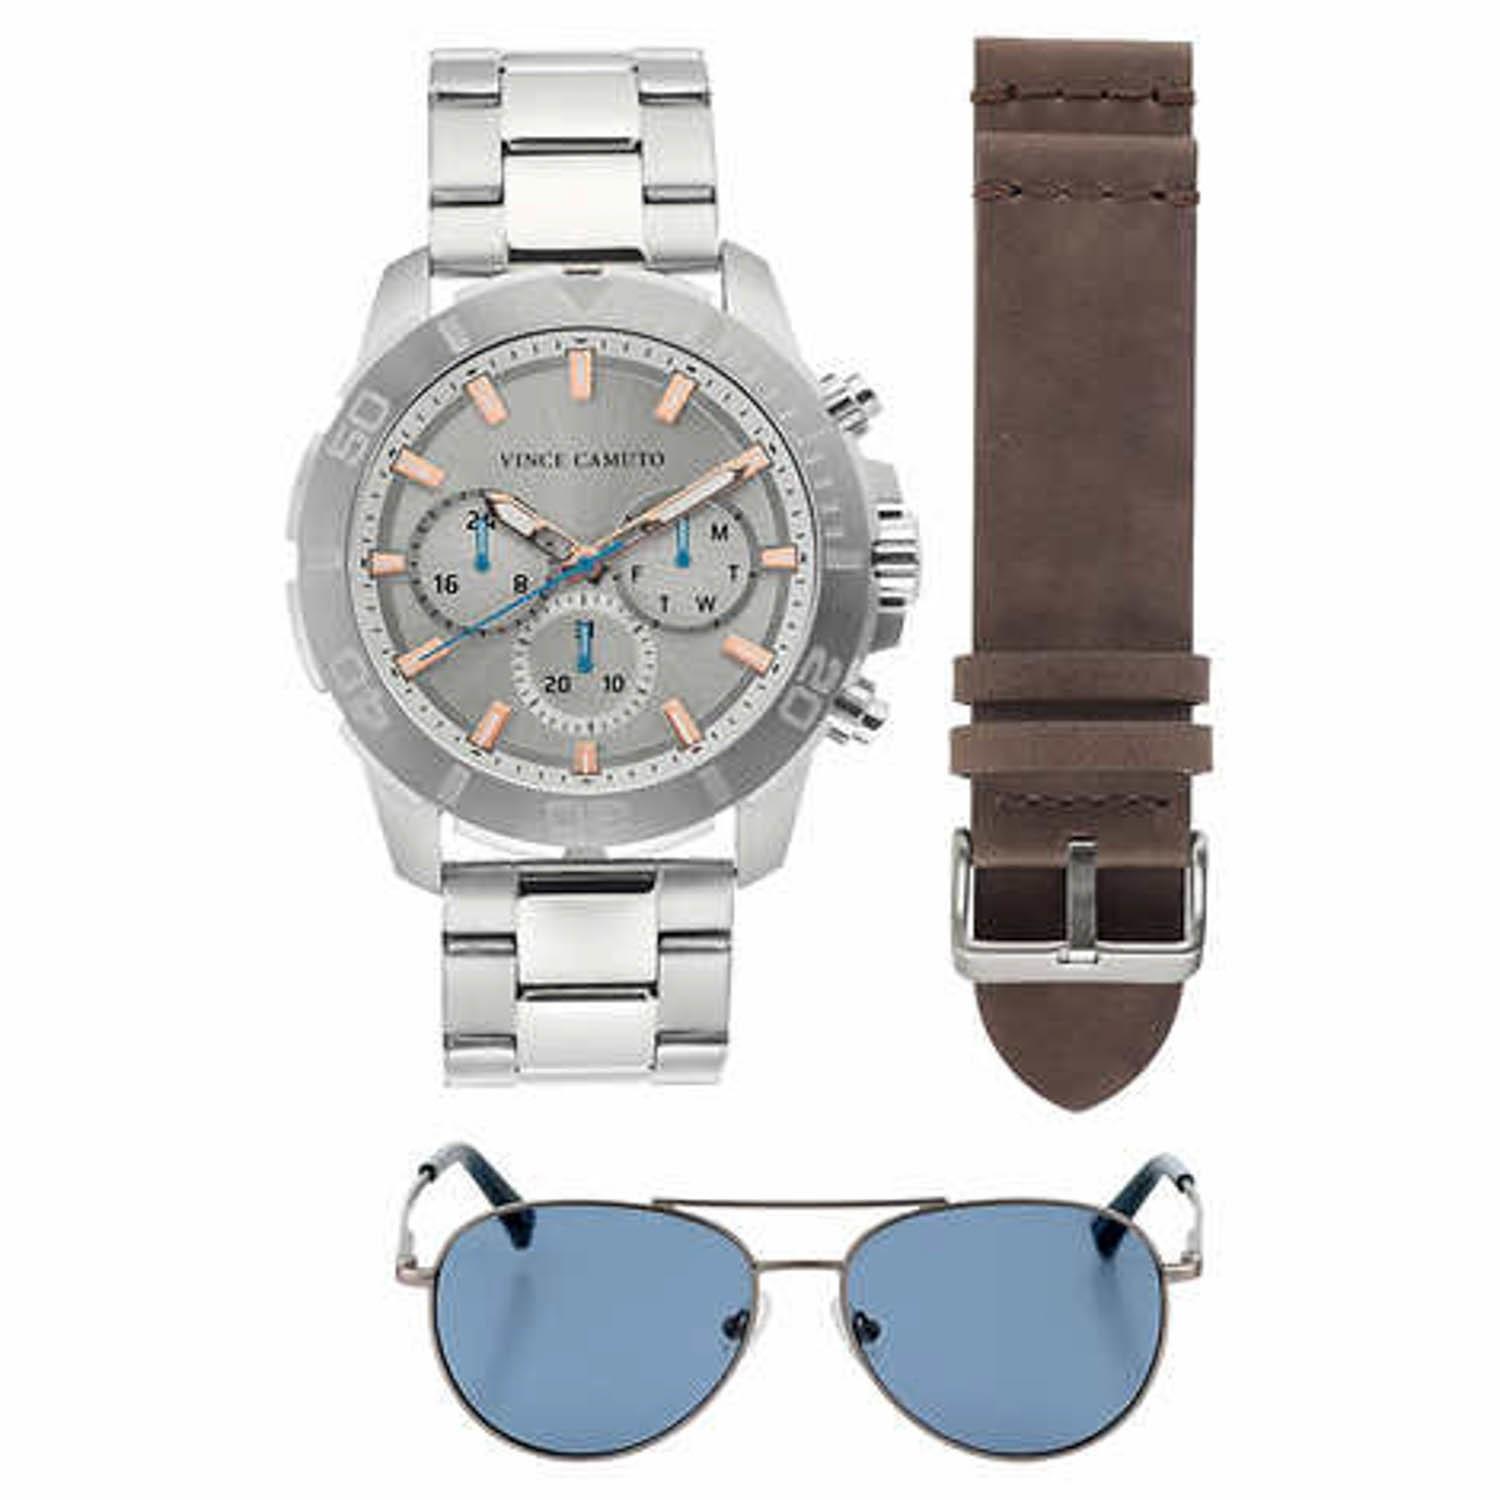 McLemore Auction Company - Auction: Luxury / Premium / Designer Watches -  Men's and Ladies - All New - Direct from Major US Retailer!! Lot includes  the best brands - Gucci, Edox,